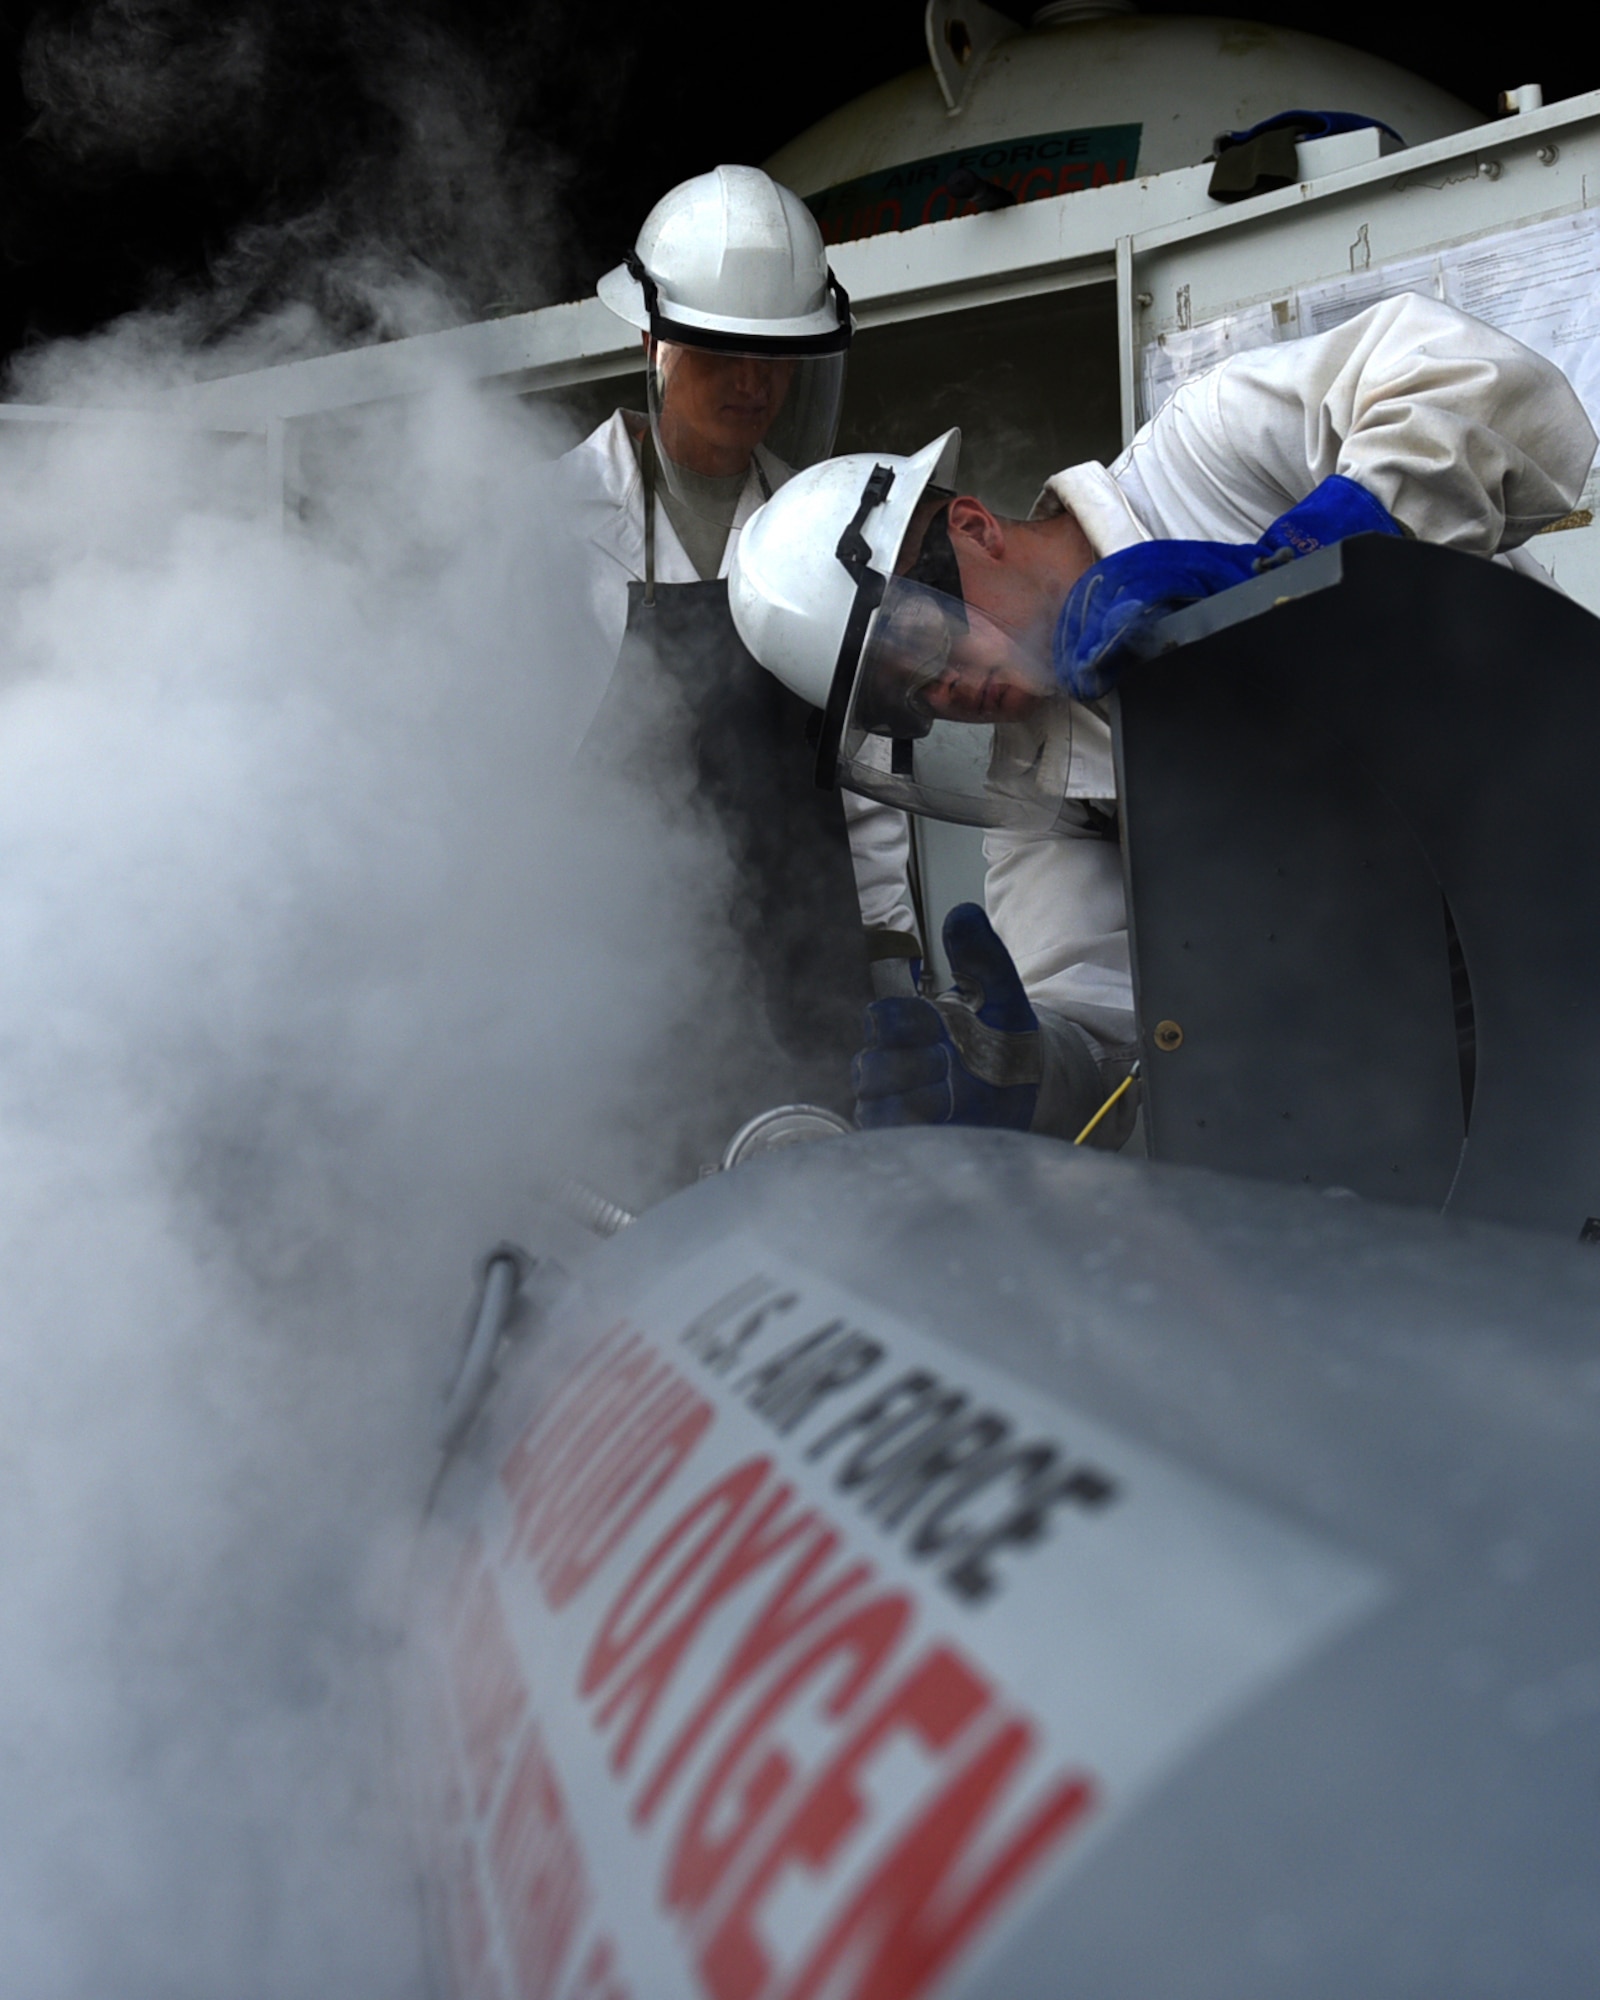 U.S. Air Force Senior Airman Jesse Frady and U.S. Air Force Senior Airman Richard Hayes, 19th Logistics Readiness Squadron fuel cryogenics journeymen, fill a 50-gallon container with liquid oxygen, or LOX, March, 27, 2017, at Little Rock Air Force Base, Ark. Frady and Hayes supply C-130J pilots with fresh oxygen so they can perform high altitude air drops, air medical evacuations and with stand high altitude cabin decompressions. (U.S. Air Force photo by Airman 1st Class Kevin Sommer Giron)